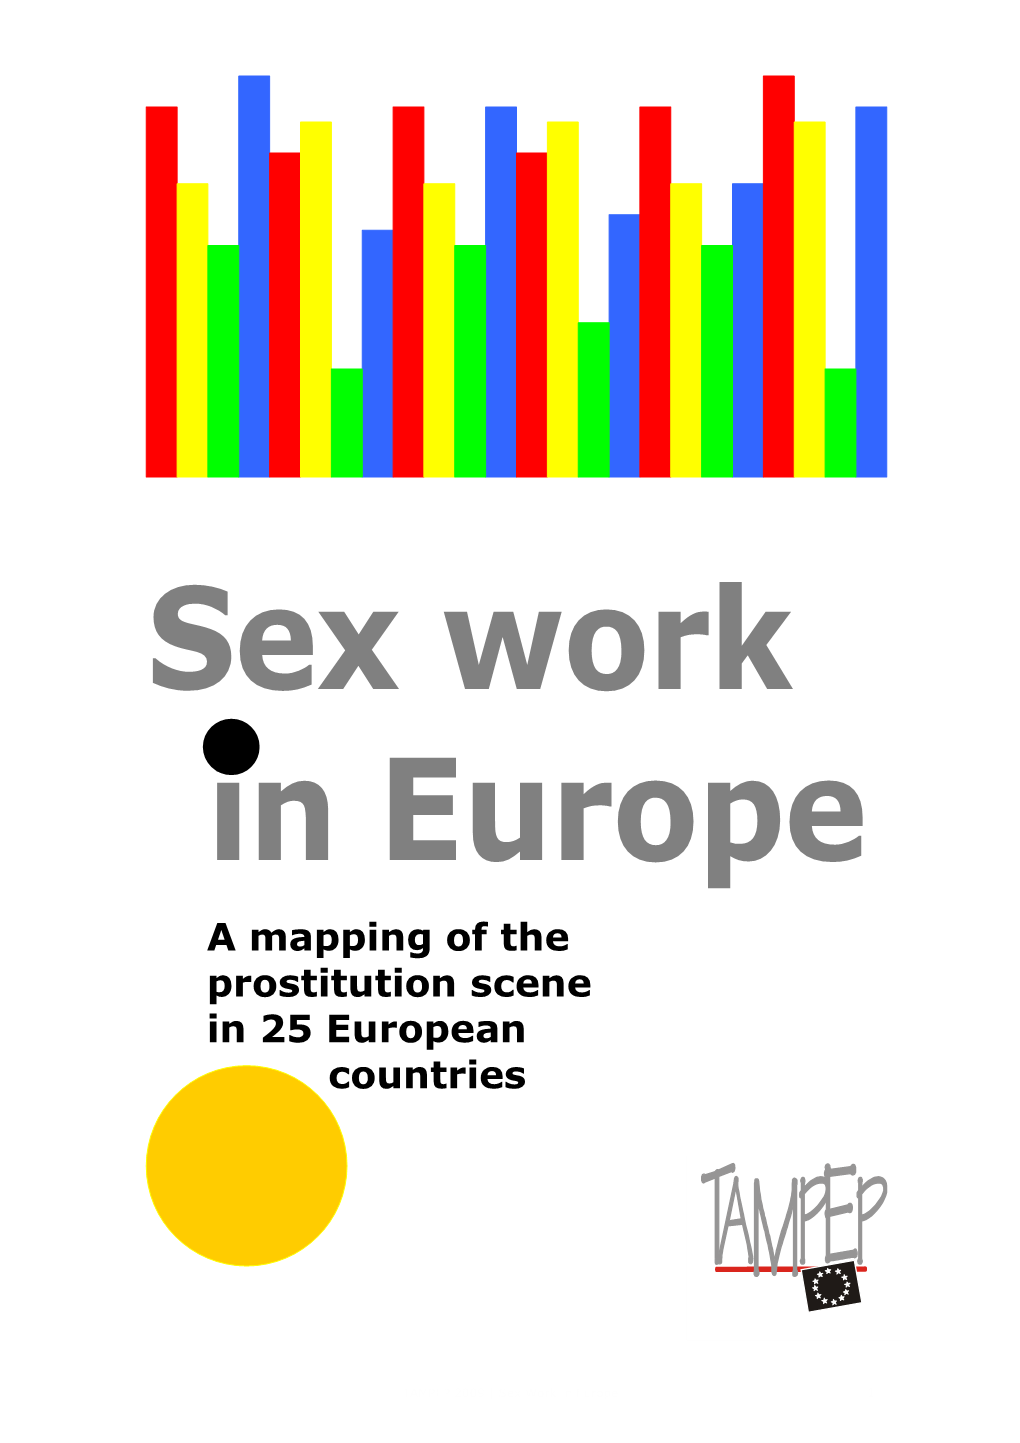 A Mapping of the Prostitution Scene in 25 European Countries